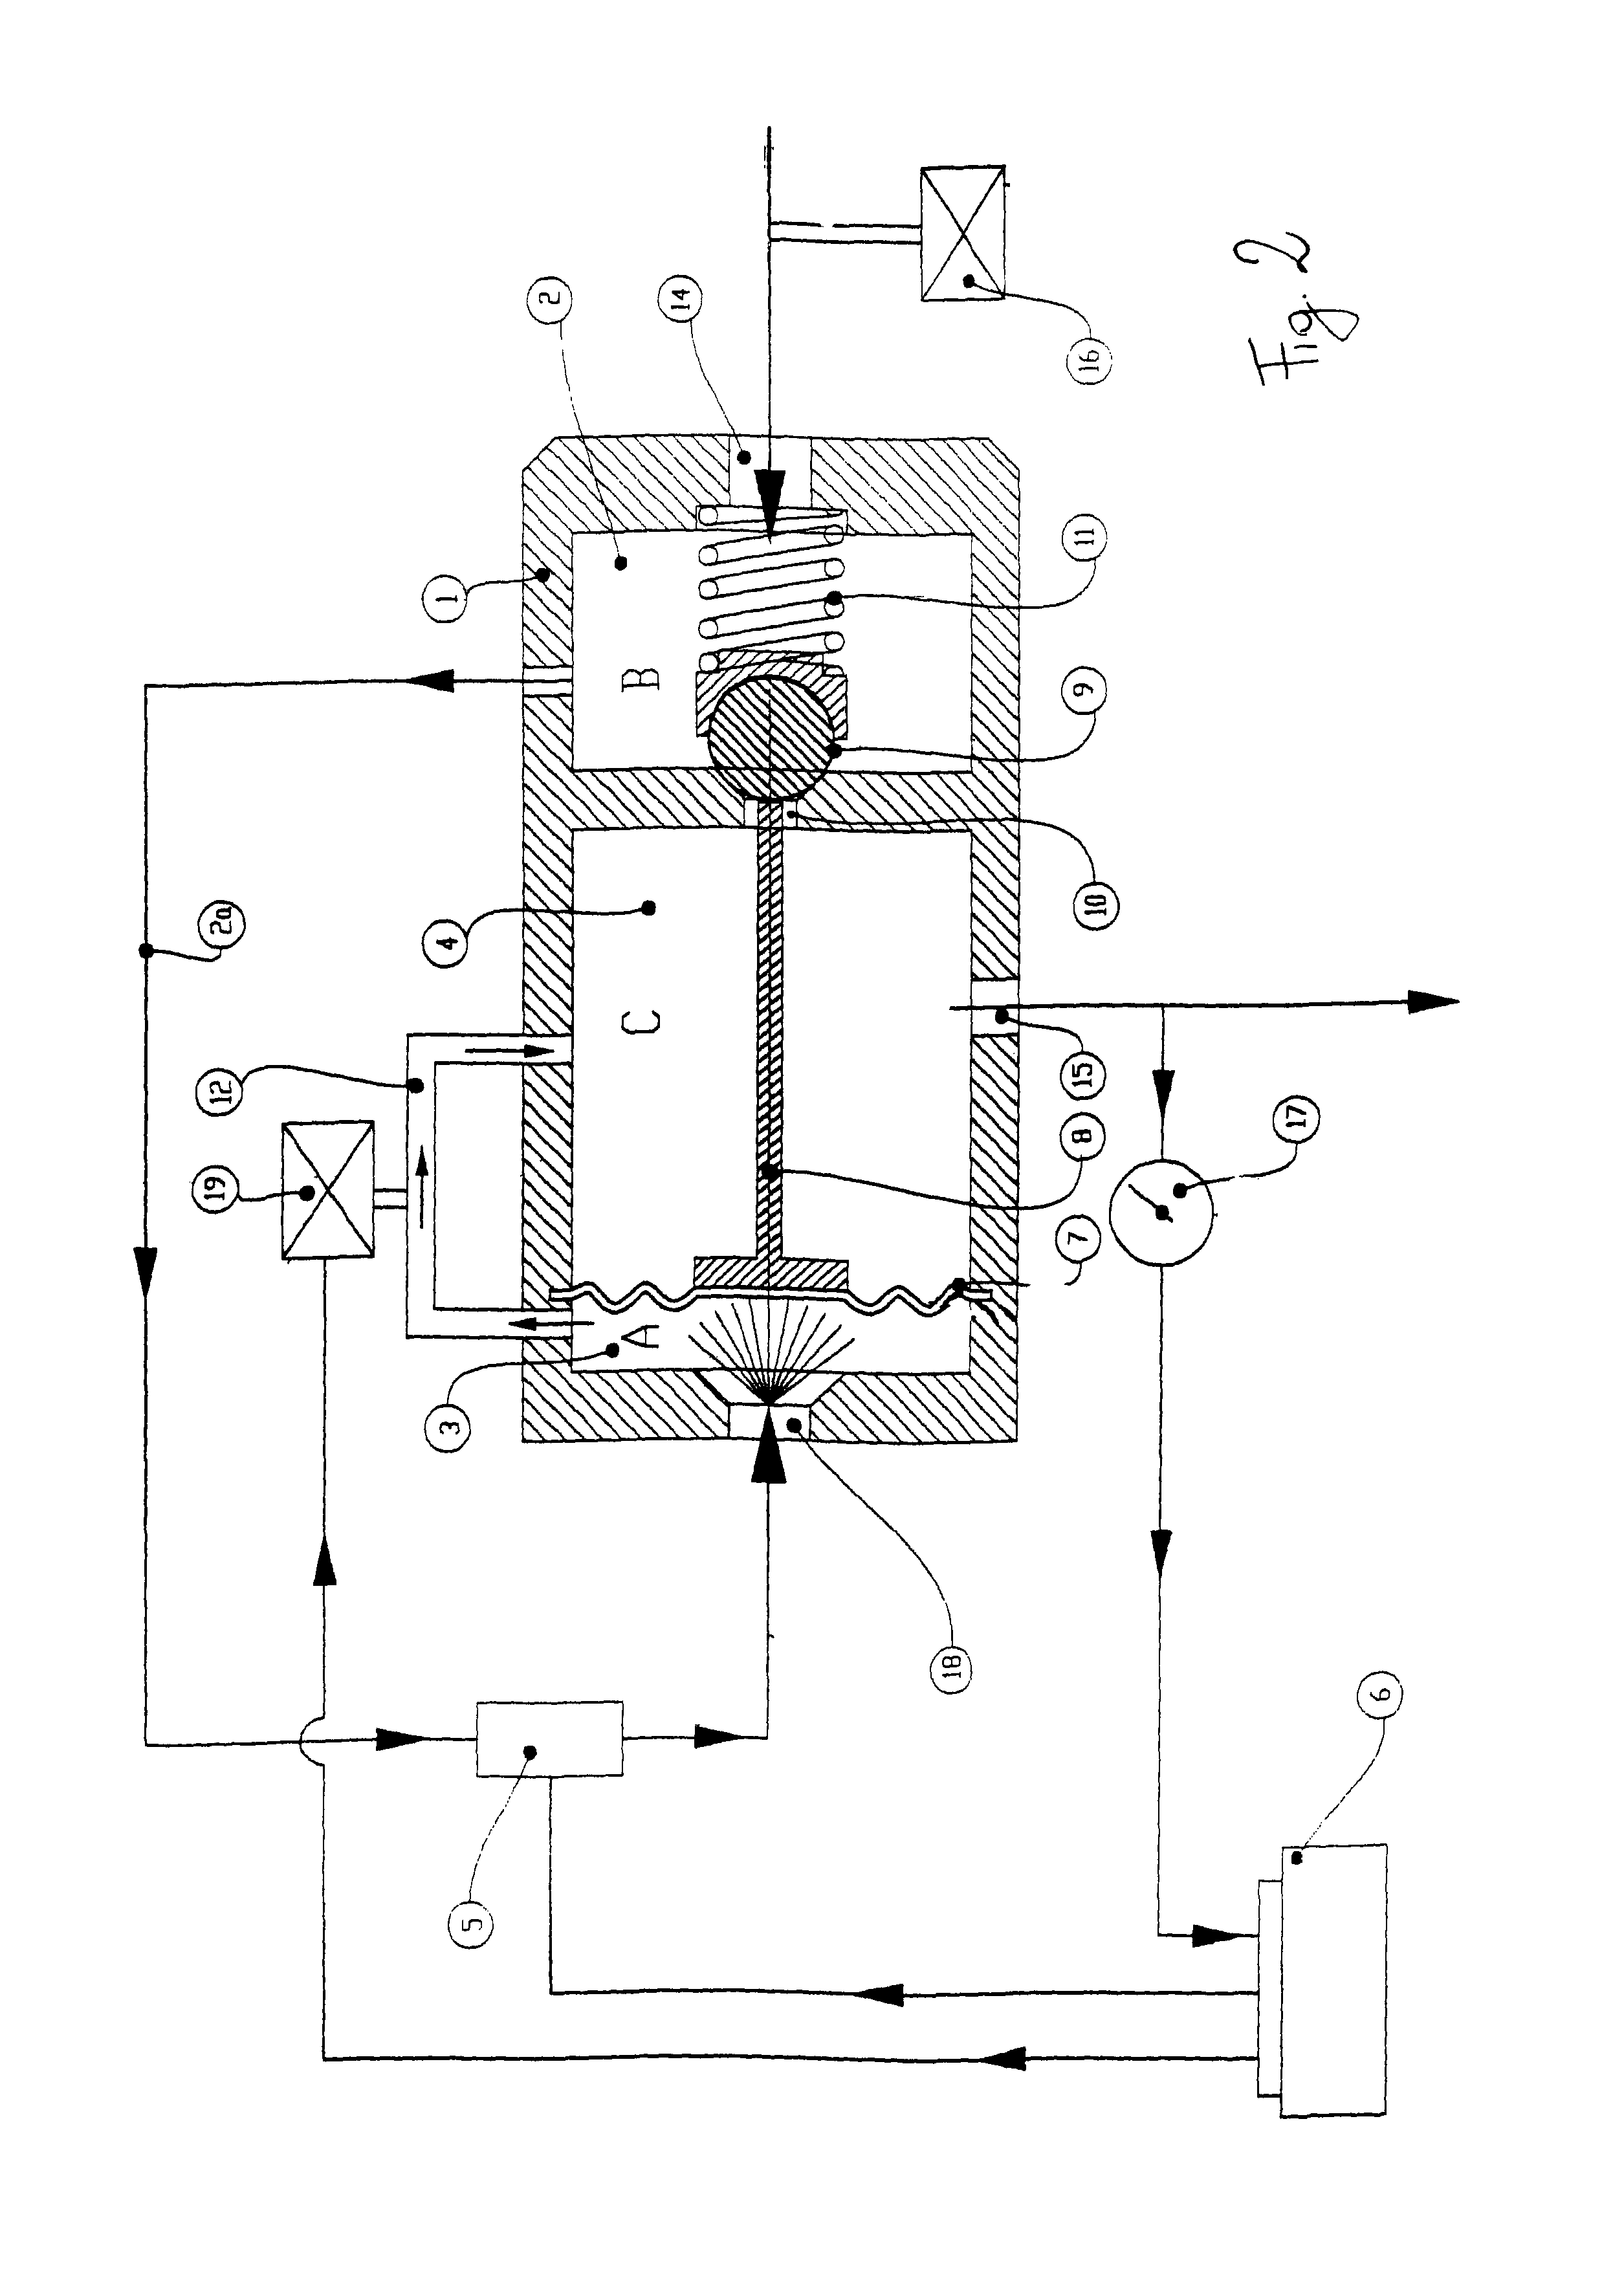 Pressure reducer-regulator for feeding internal combustion engines with methane or other similar fuels